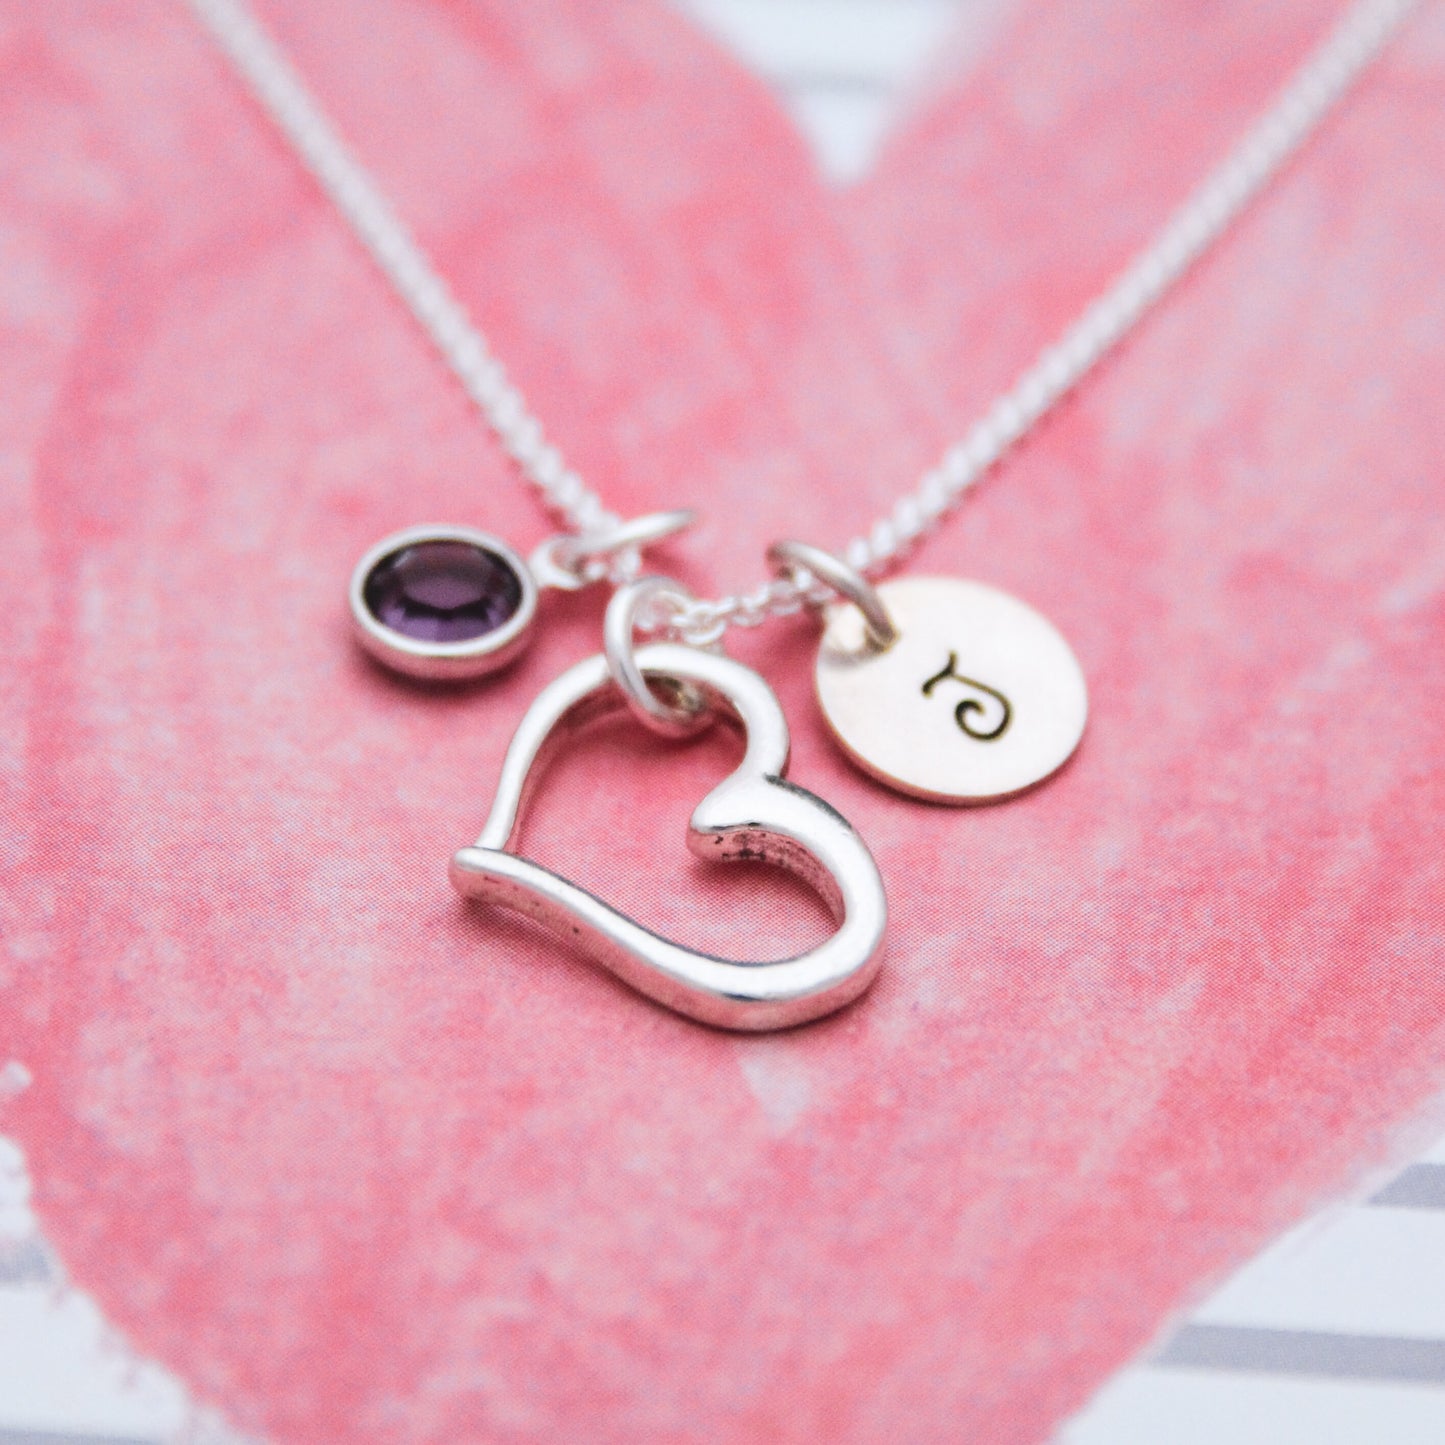 Open Heart Charm Necklace, Initial & Birthstone Heart Necklace, Hand Stamped Valentine's Day Necklace, Bridesmaid Wedding Necklaces Gift